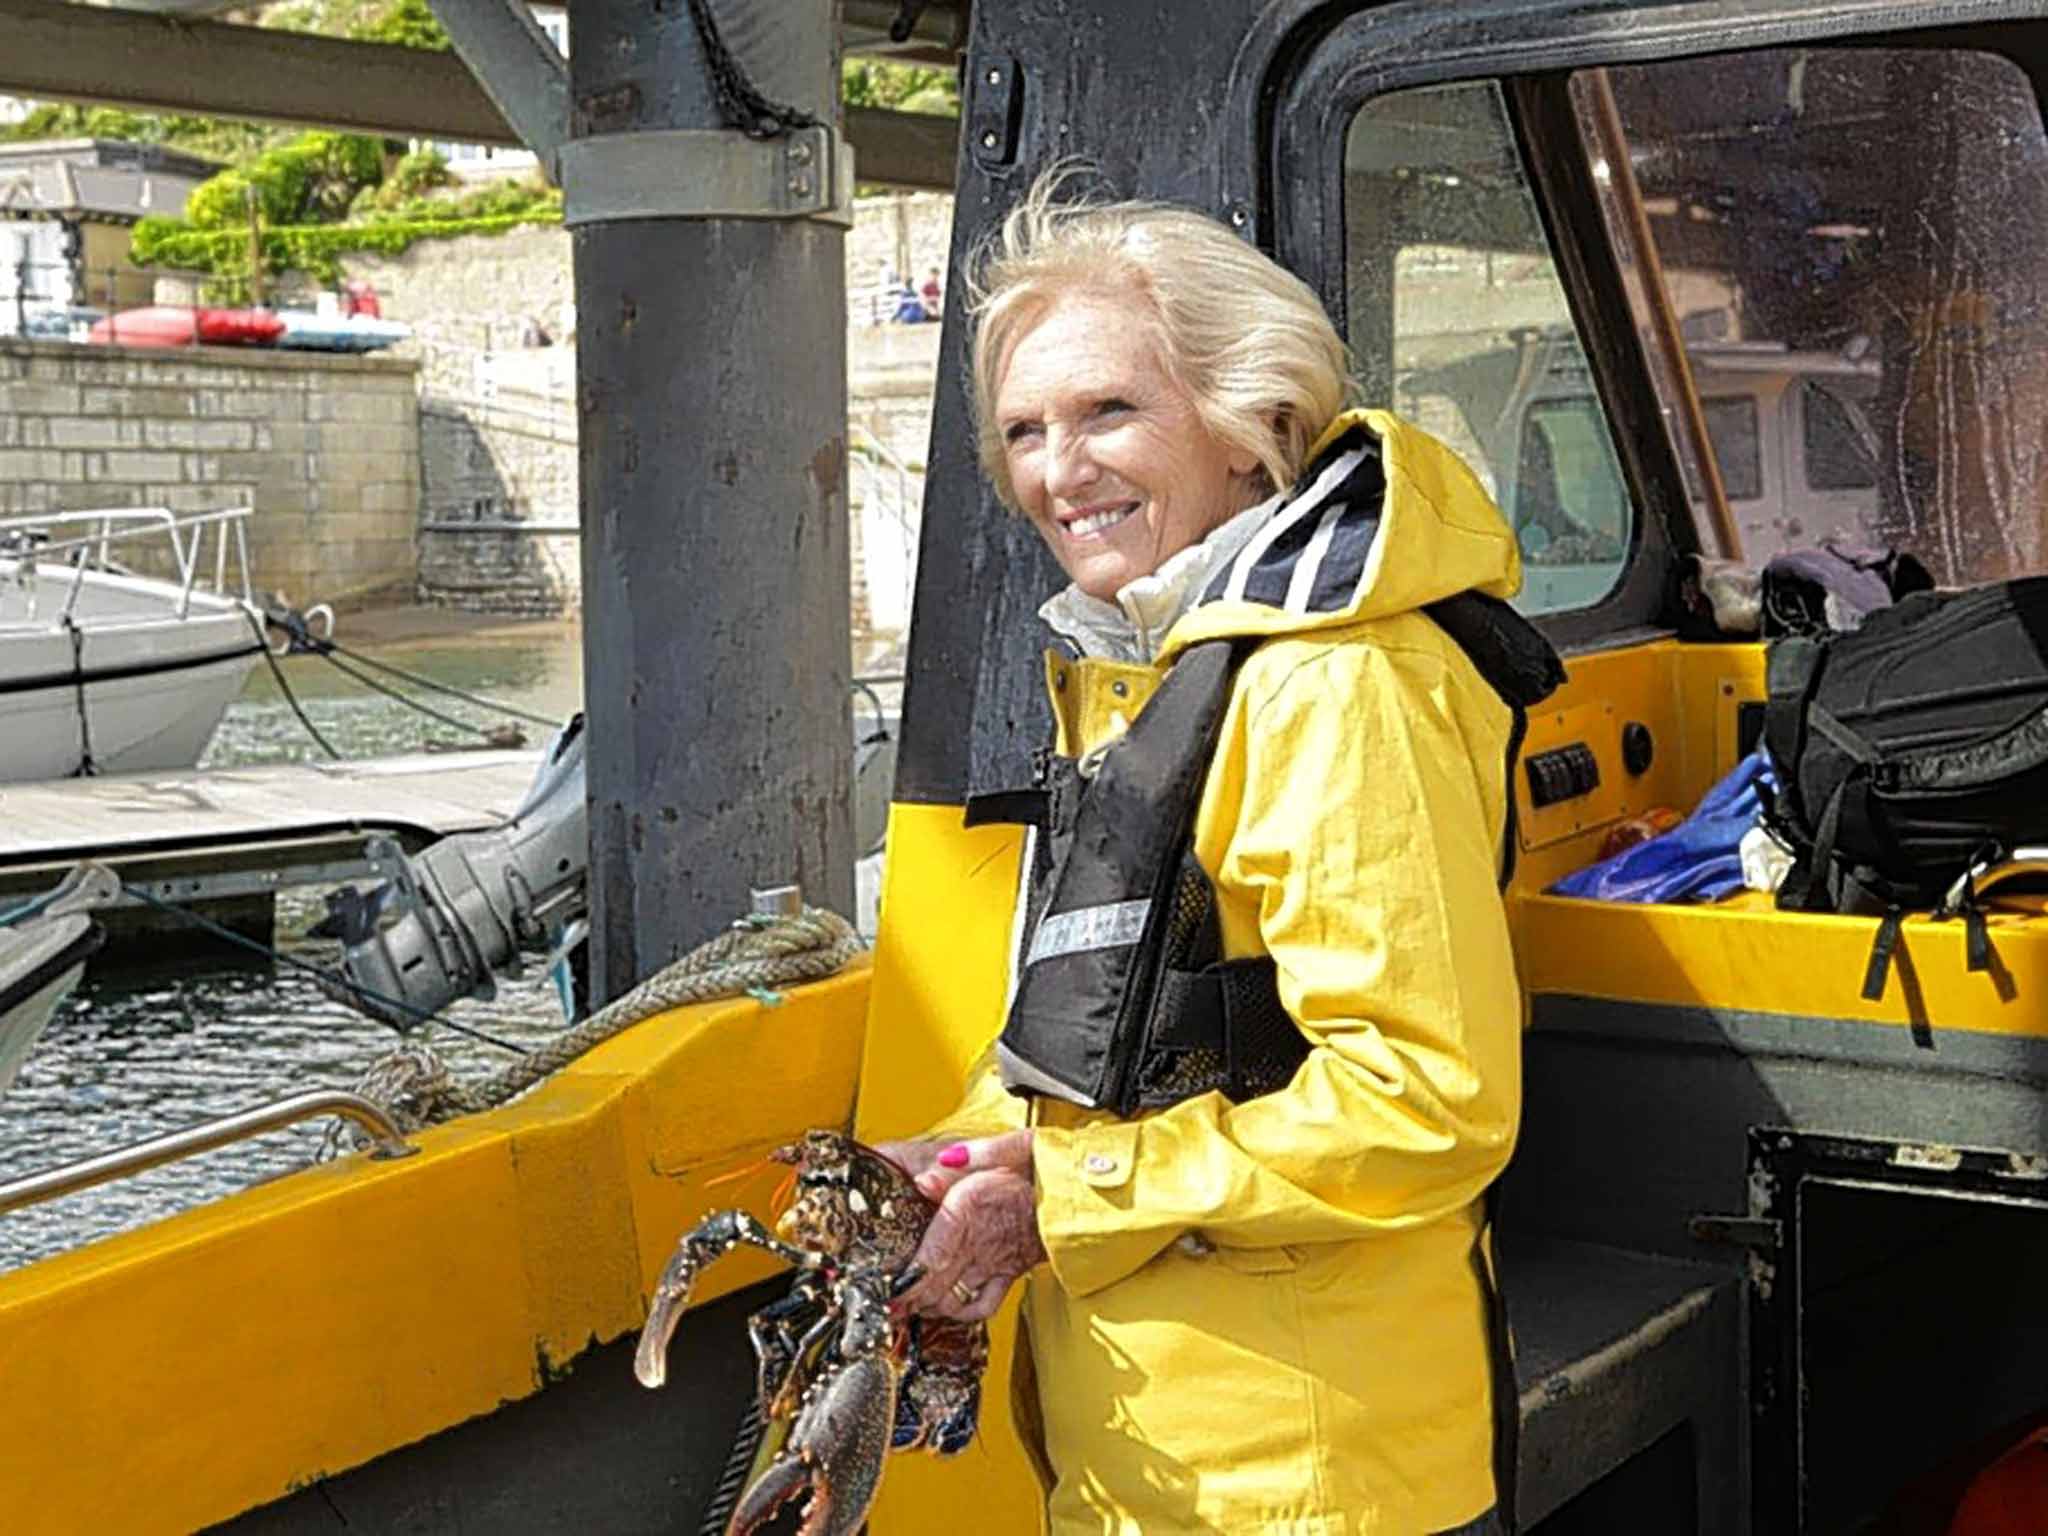 Mary Berry S Foolproof Cooking Bbc2 Tv Review A Show As Old School As An Enid Blyton Story